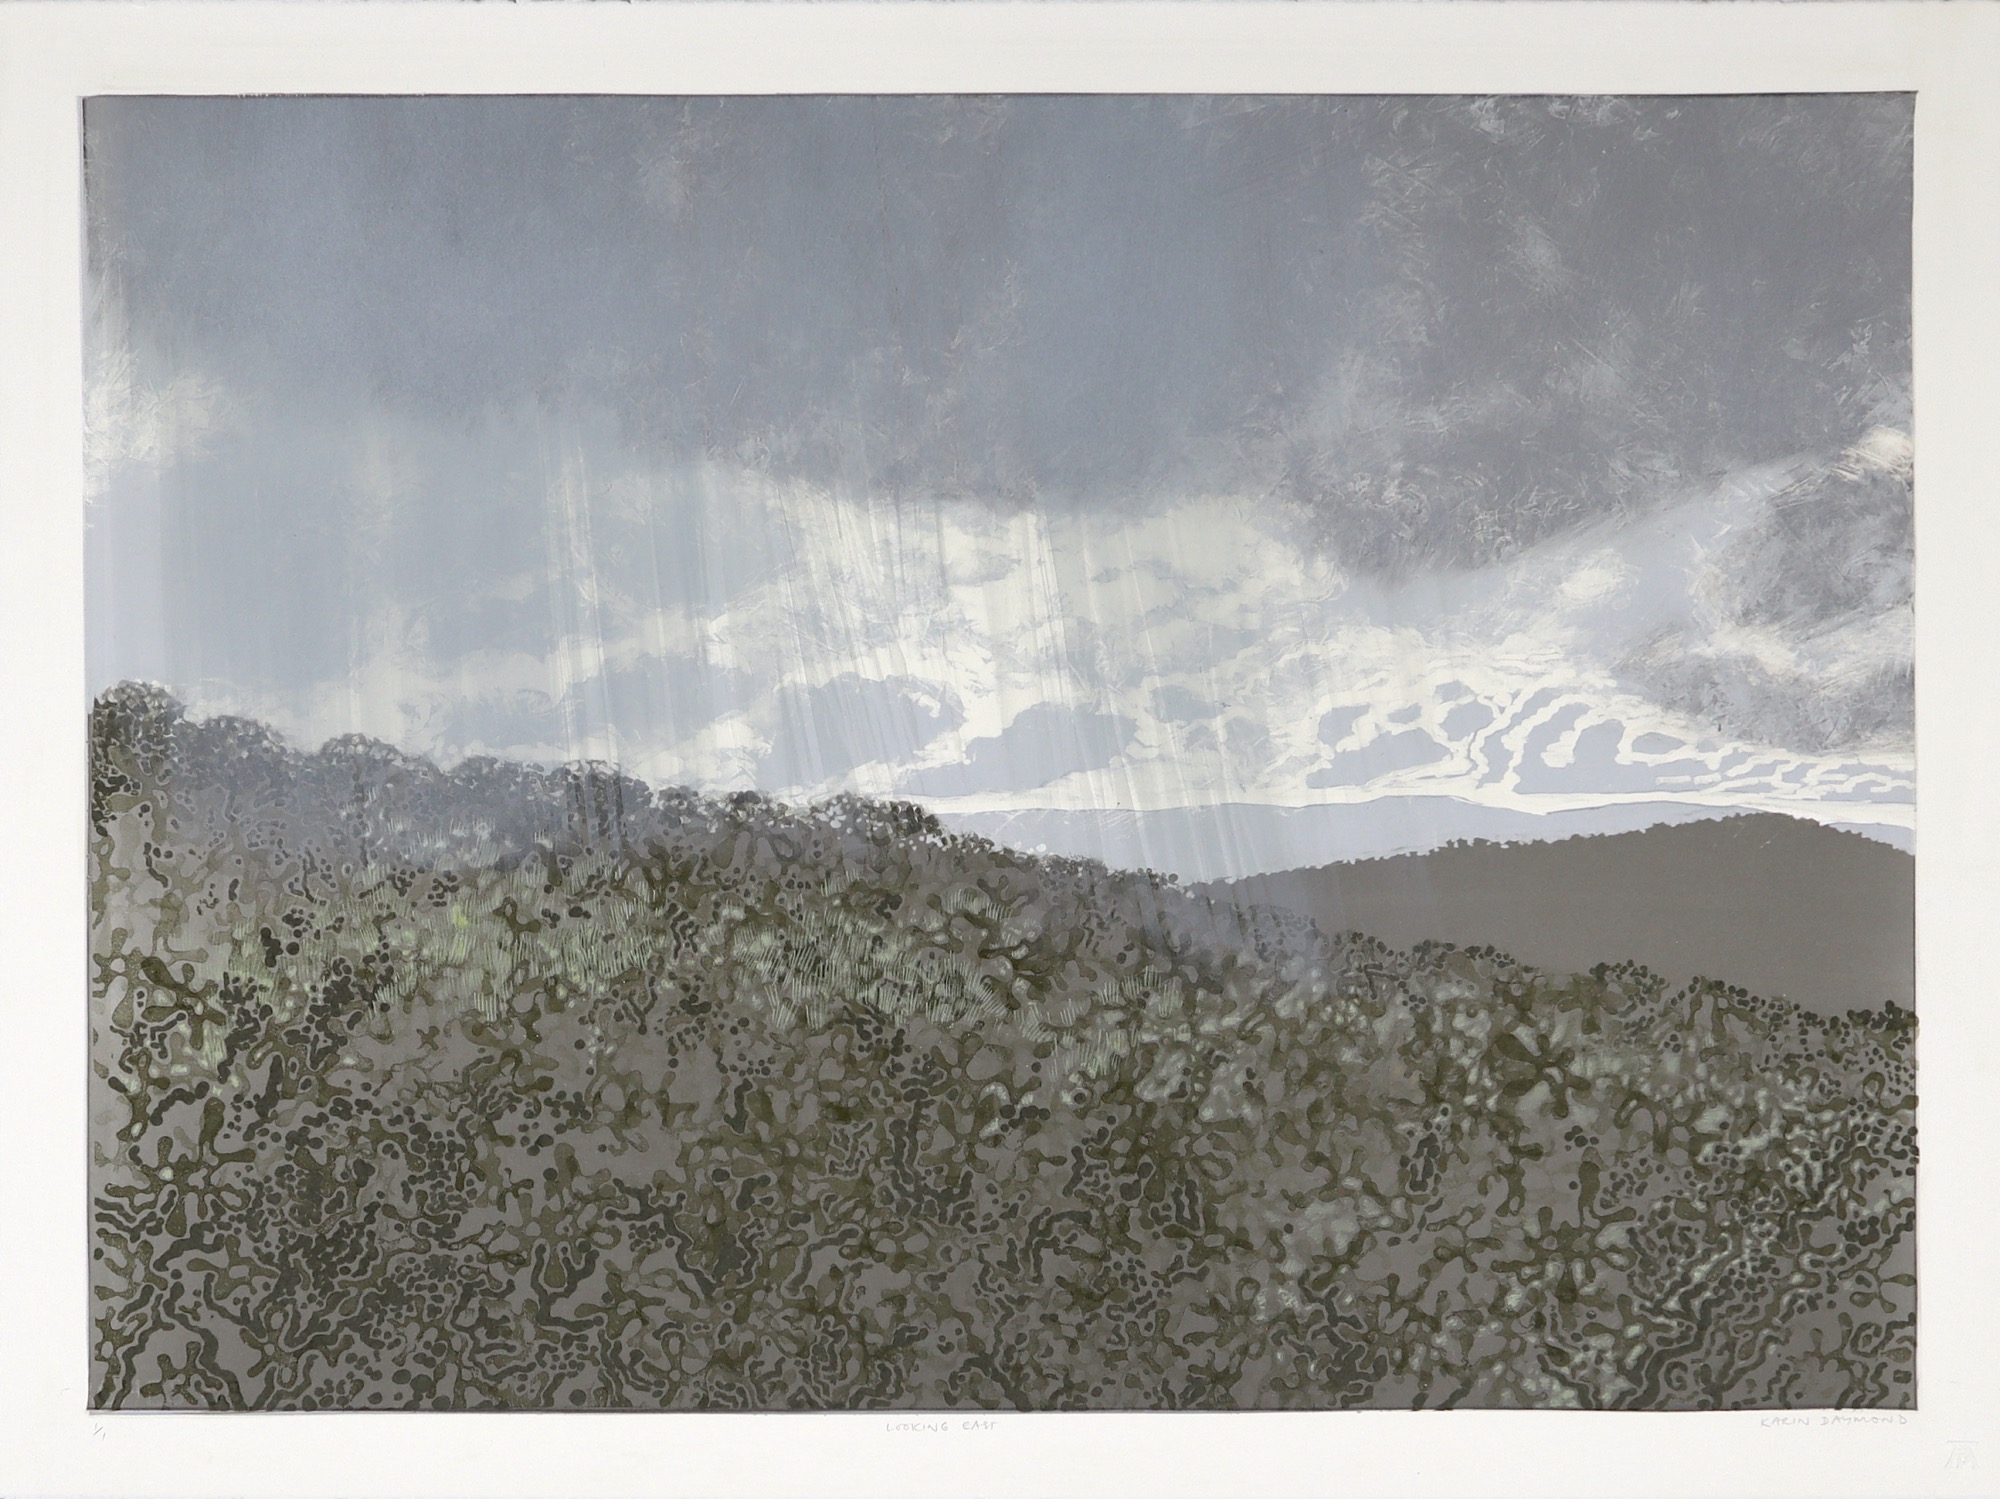 Archive of lithographs and monoprints done by Karin Daymond at The Artists' Press.